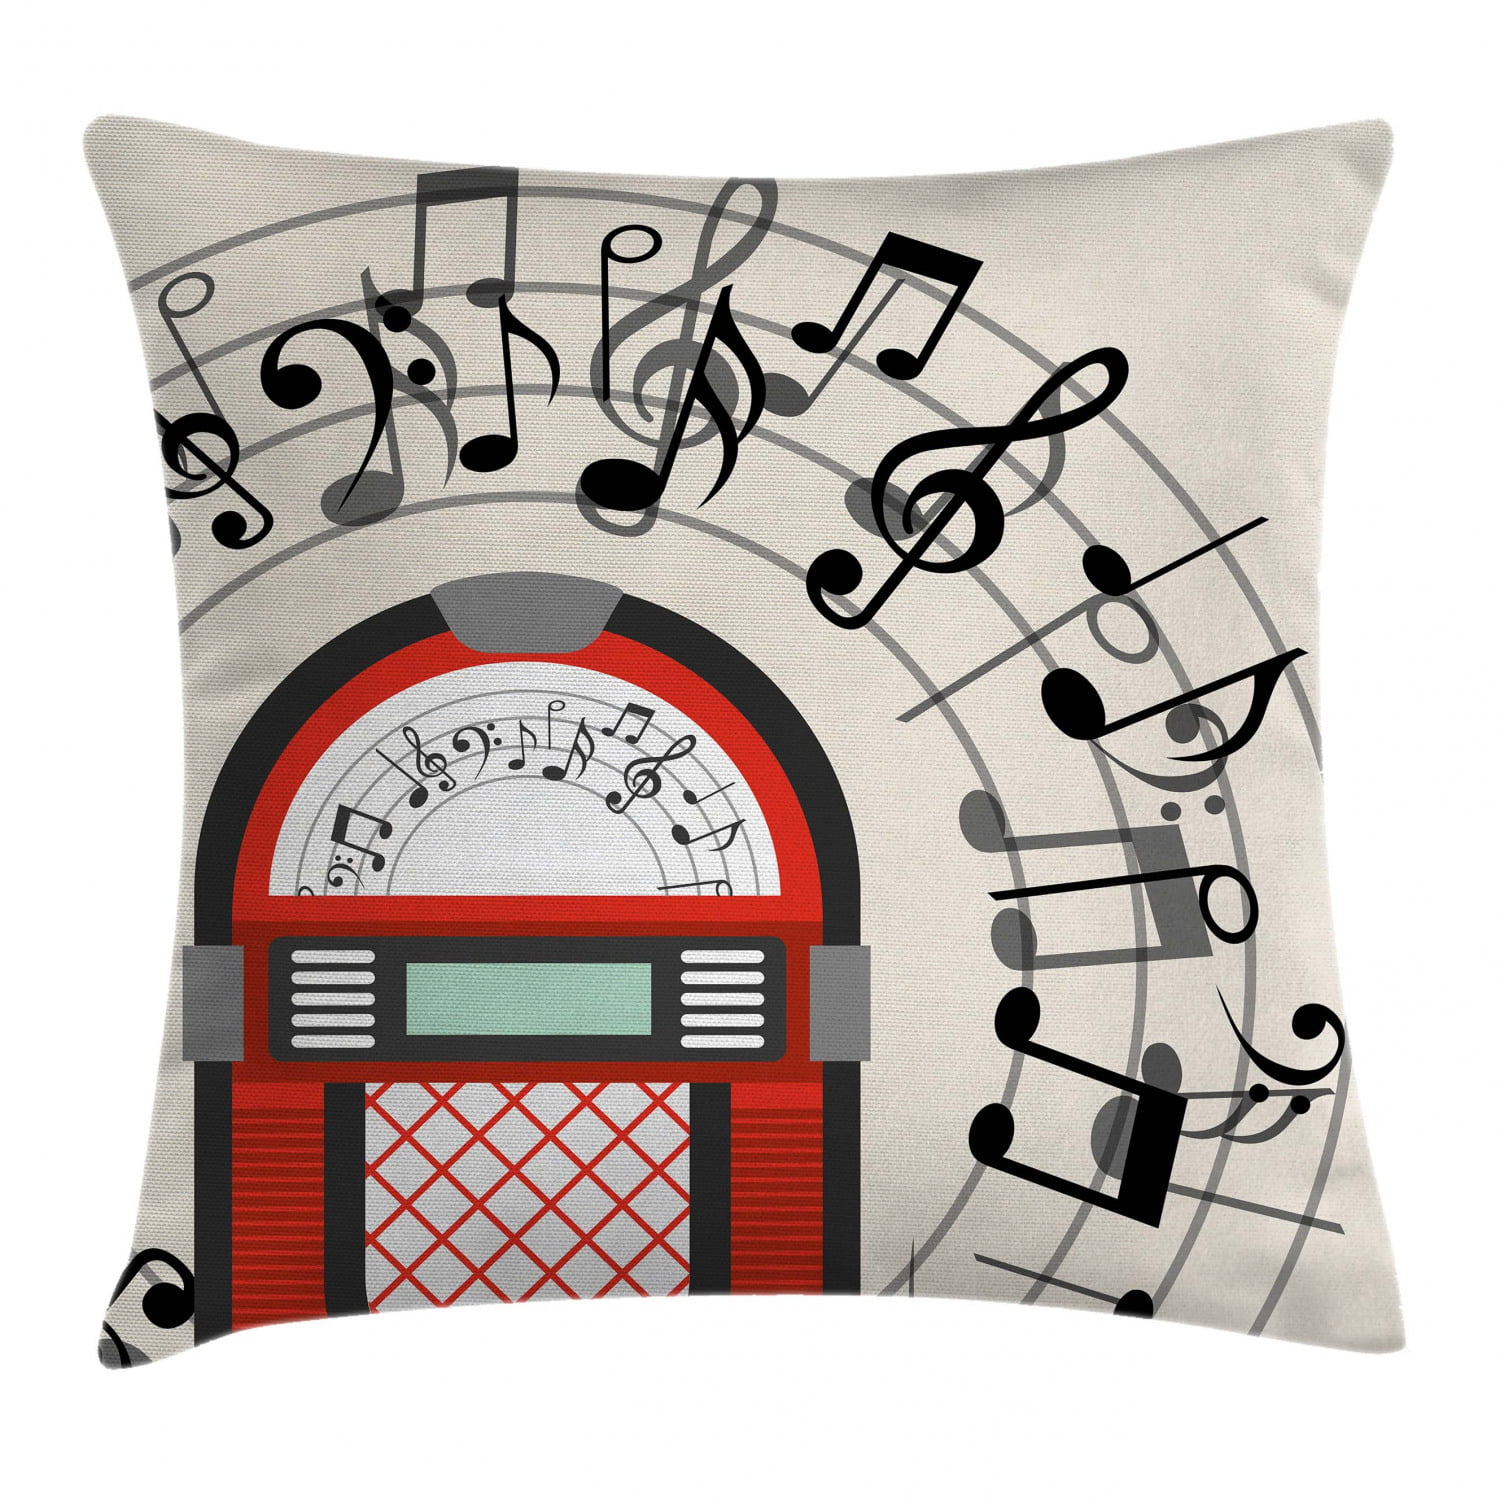 Music Throw Pillow Cases Cushion Covers Ambesonne Home Decor 8 Sizes 